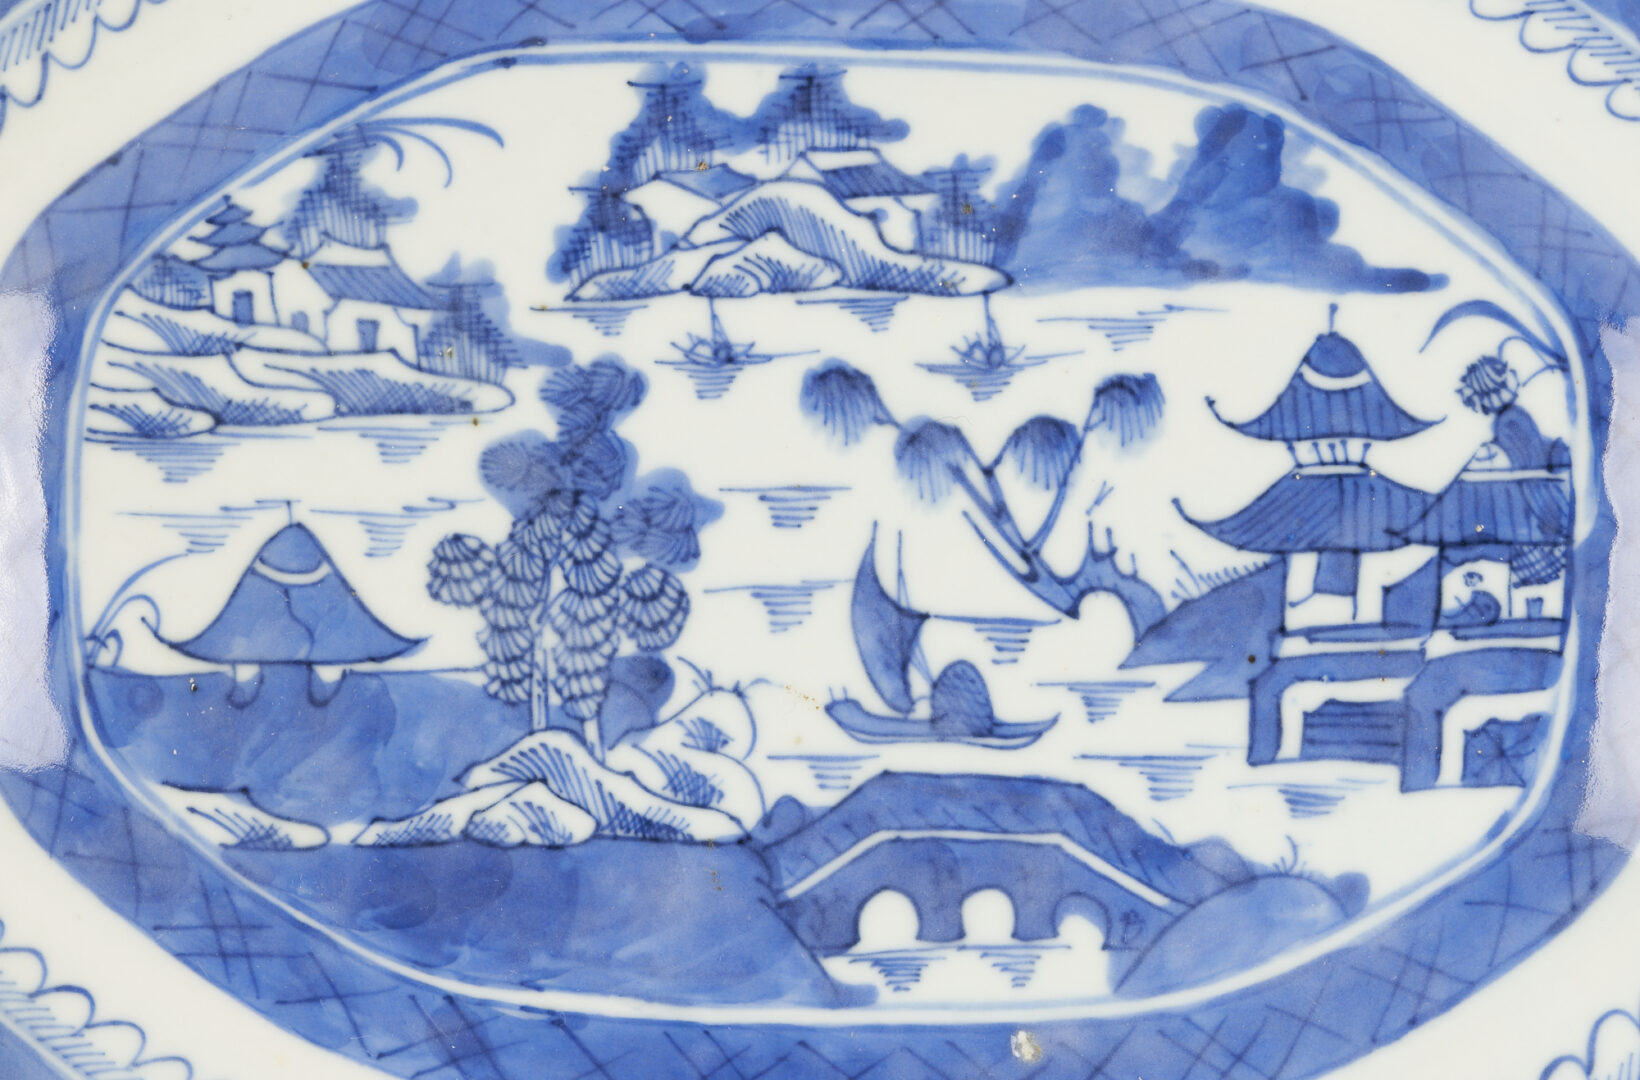 Lot 245: 10 Assorted Chinese Export Canton Porcelain Dinnerware Items, incl. Tureens